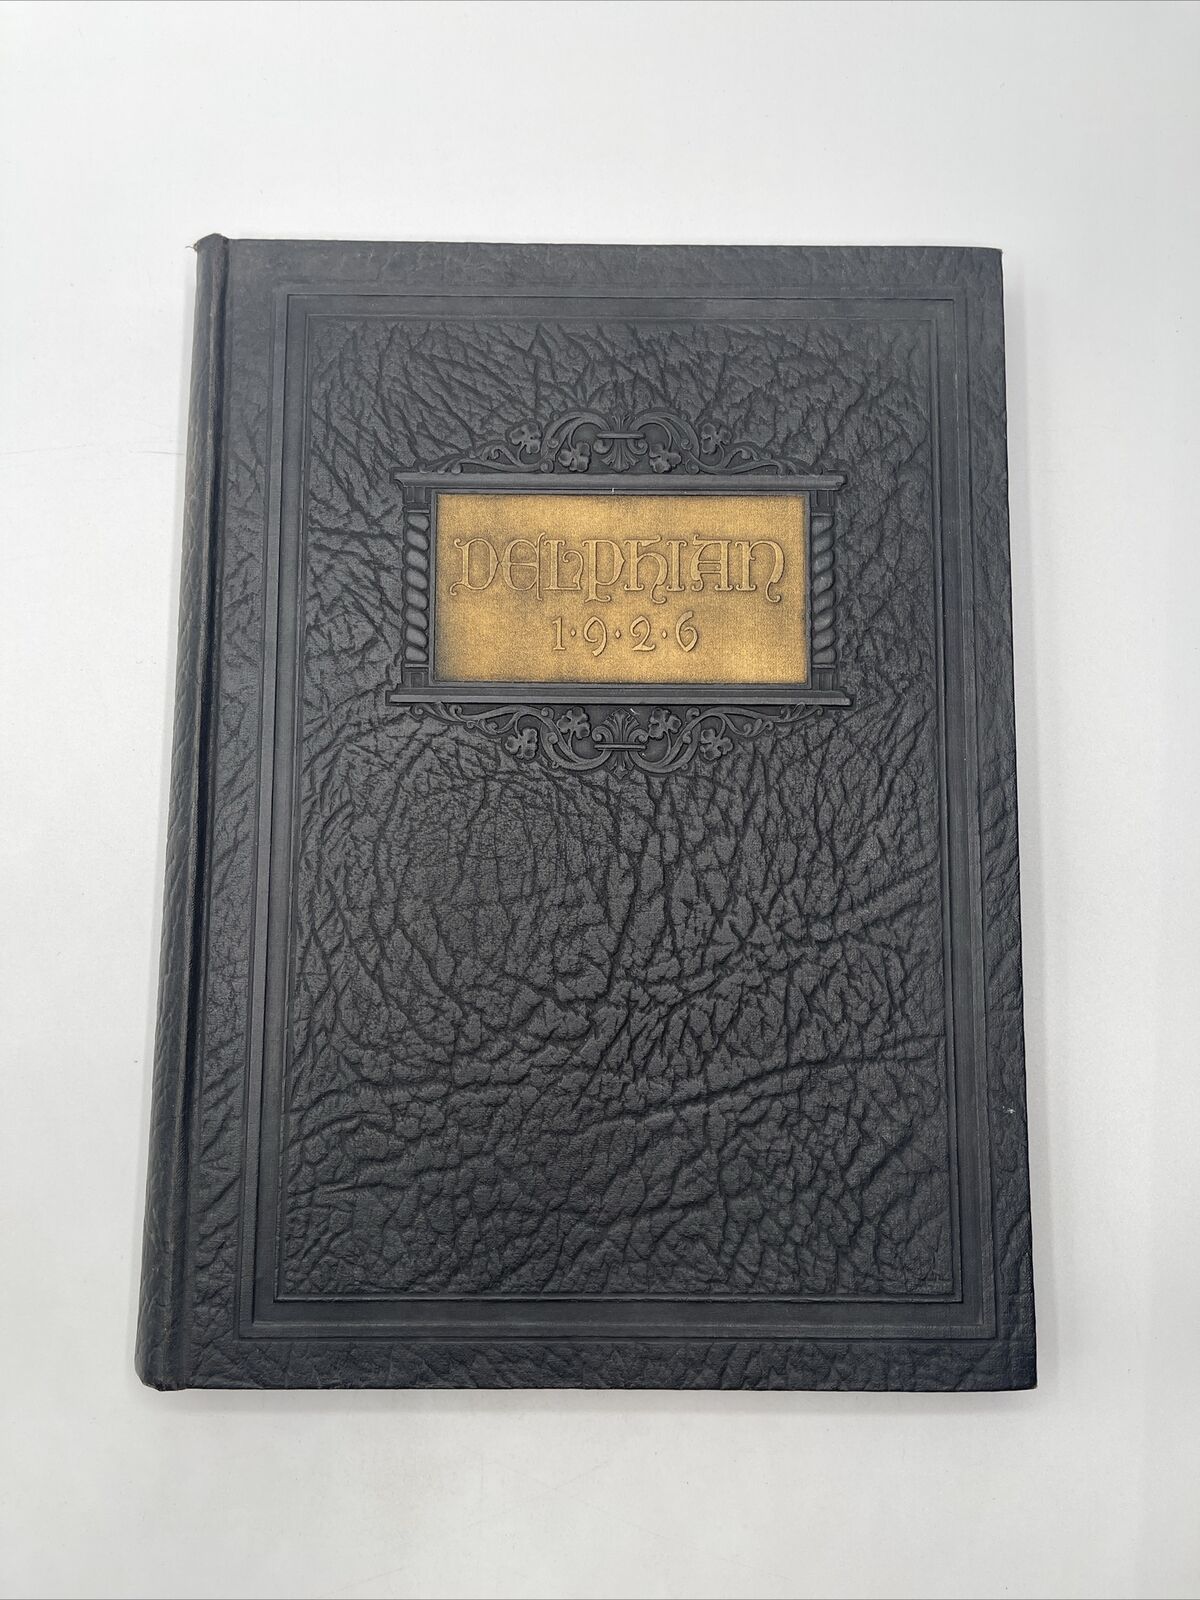 1926 The Delphian Edition Central High School Kalamazoo Mich Yearbook Signatures